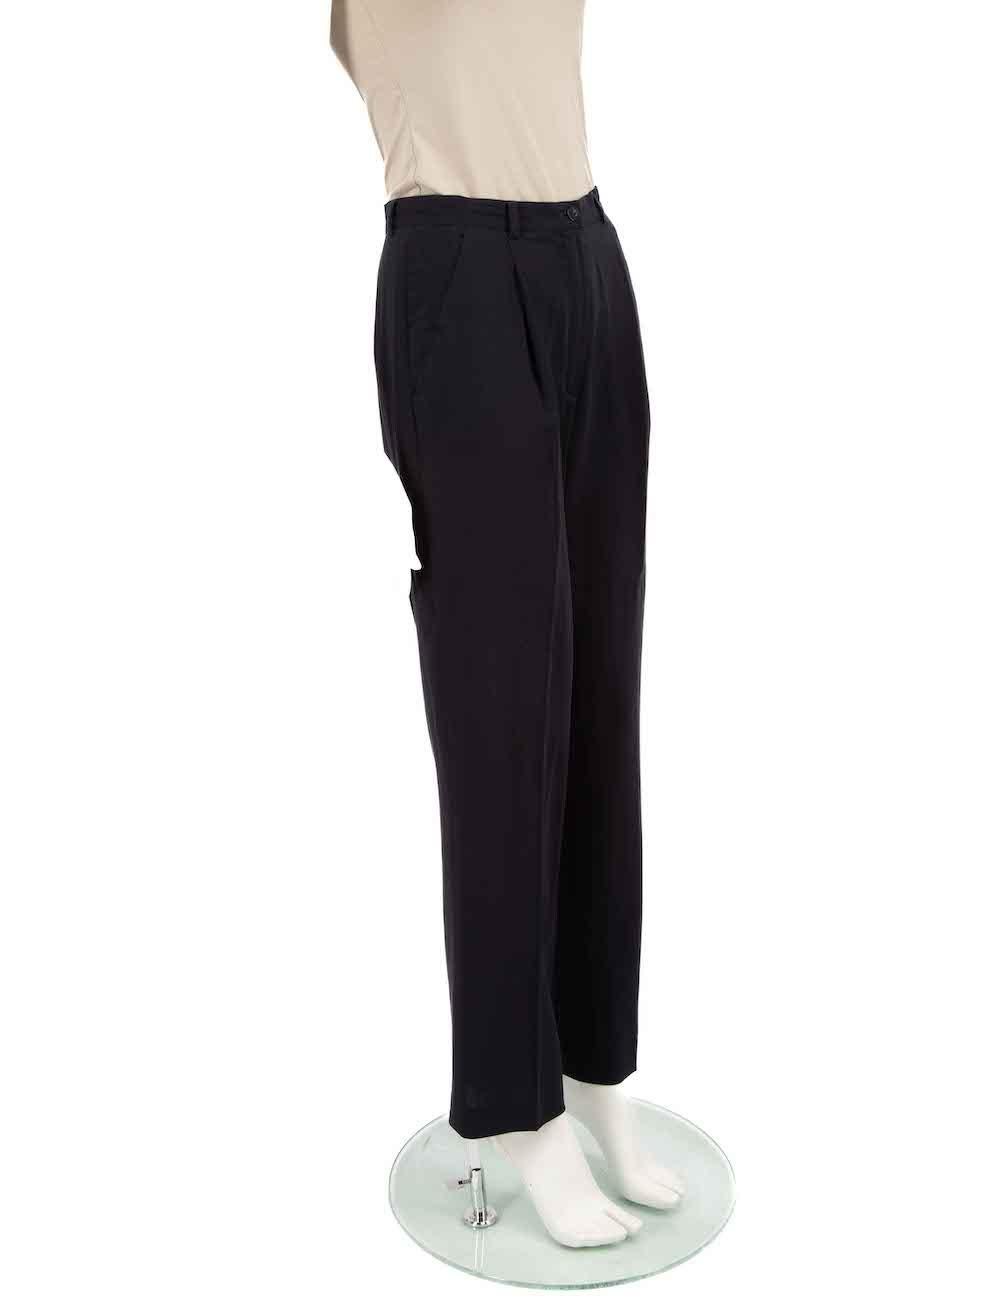 CONDITION is Very good. Hardly any visible wear to trousers is evident on this used Escada designer resale item.
 
 
 
 Details
 
 
 Navy
 
 Wool
 
 Trousers
 
 Straight leg
 
 High rise
 
 2x Side pockets
 
 Fly zip and button fastening
 
 
 
 
 
